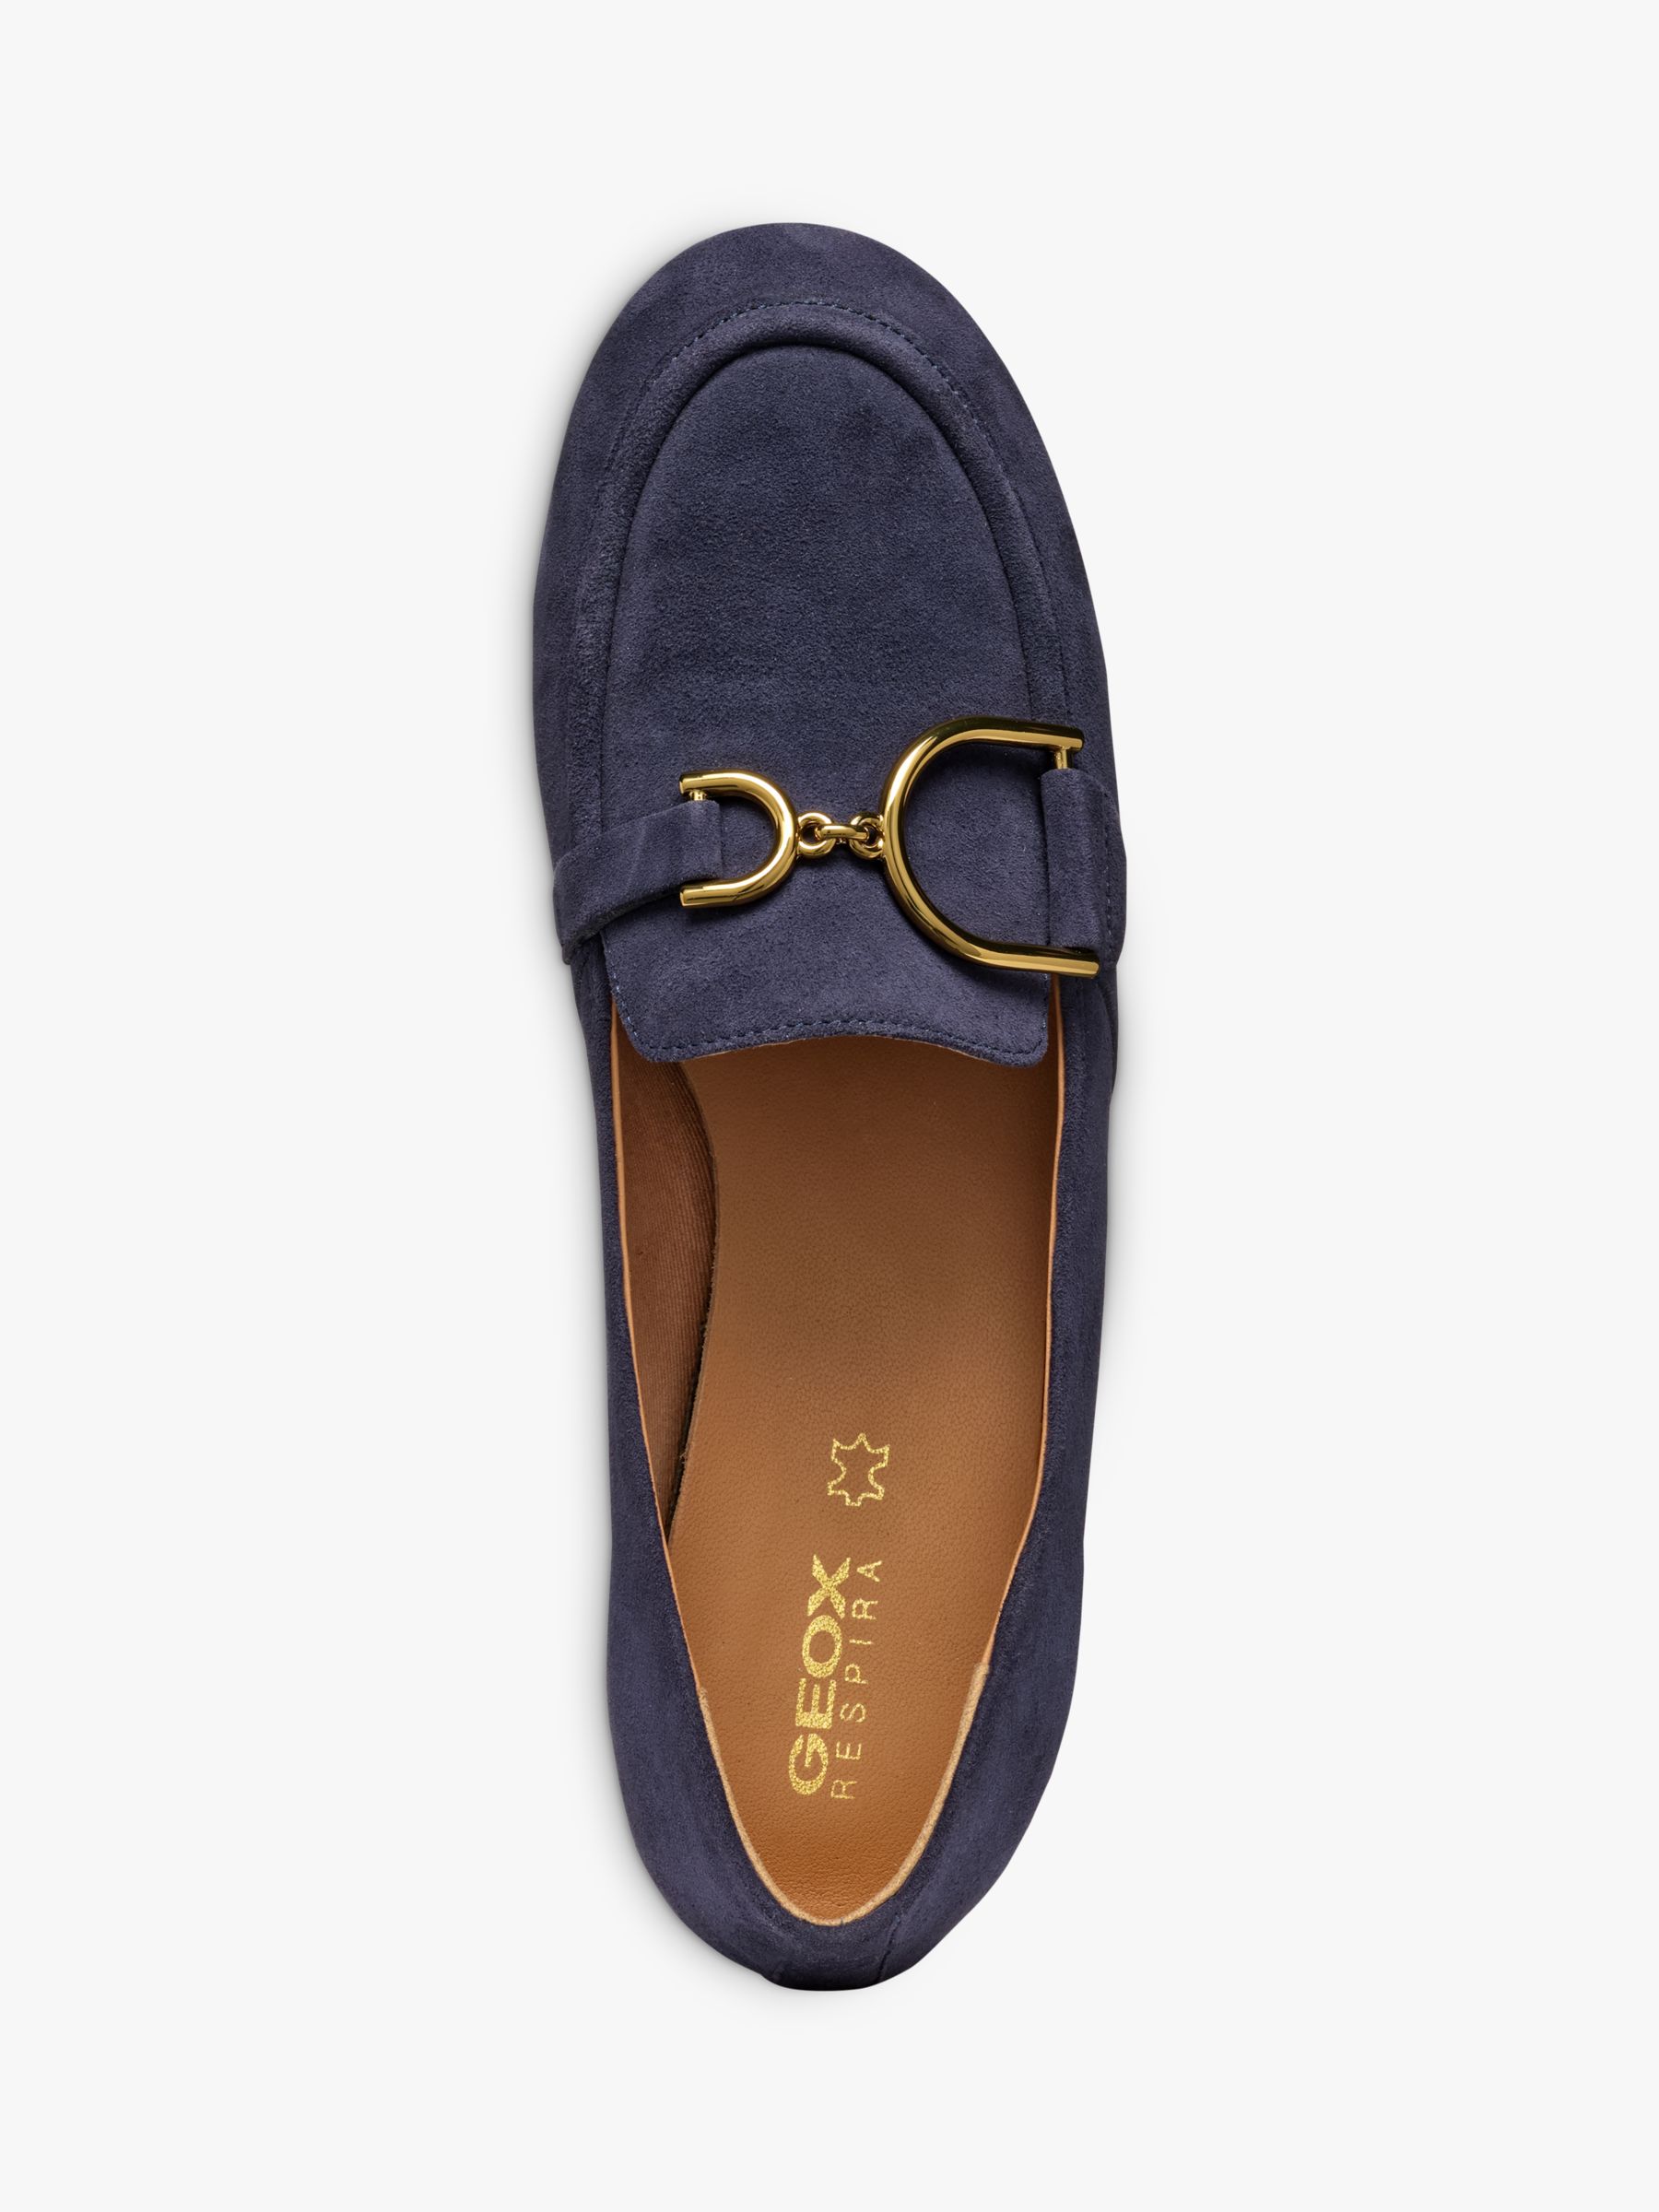 Geox Palmaria Suede Loafers, Navy at John Lewis & Partners